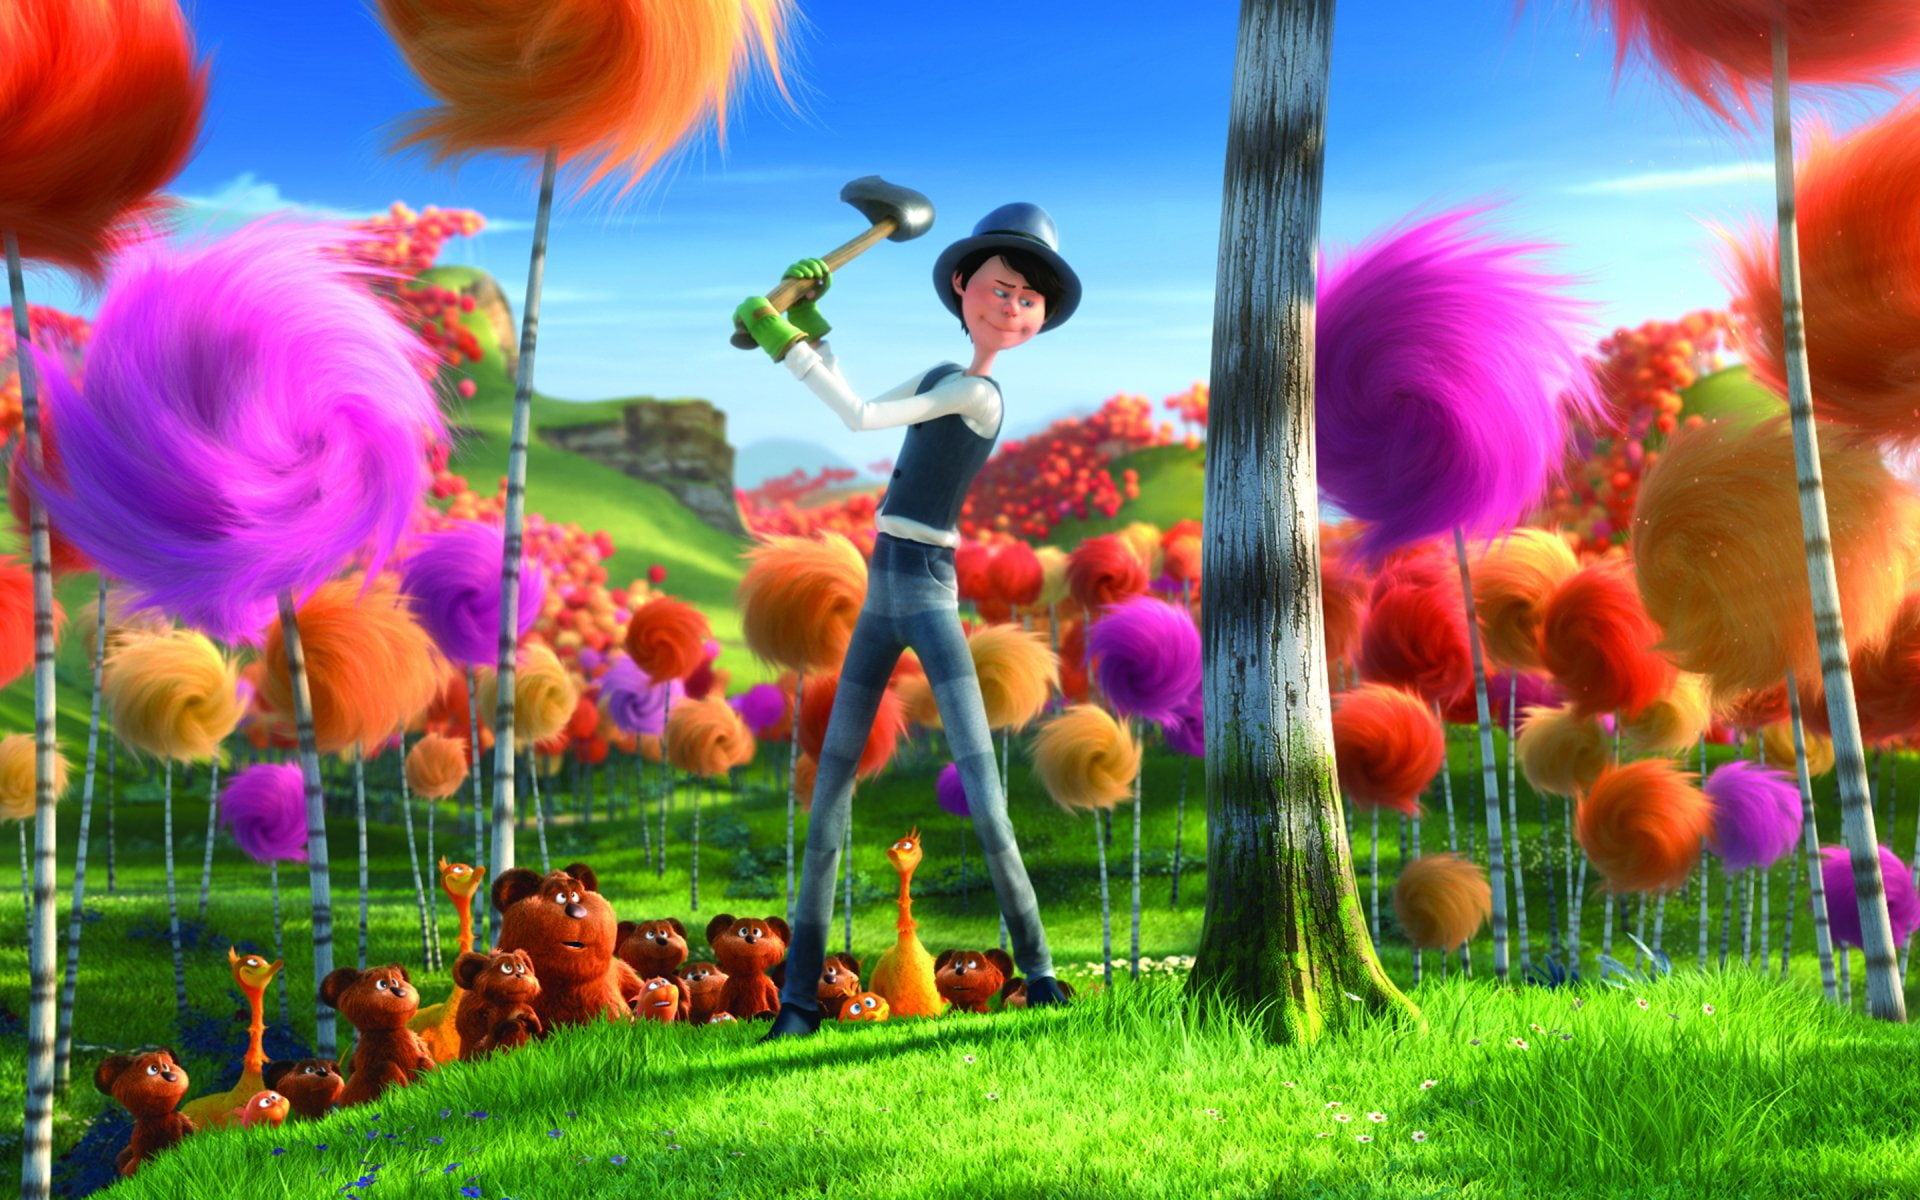 Movie, The Lorax, The Once-Ler